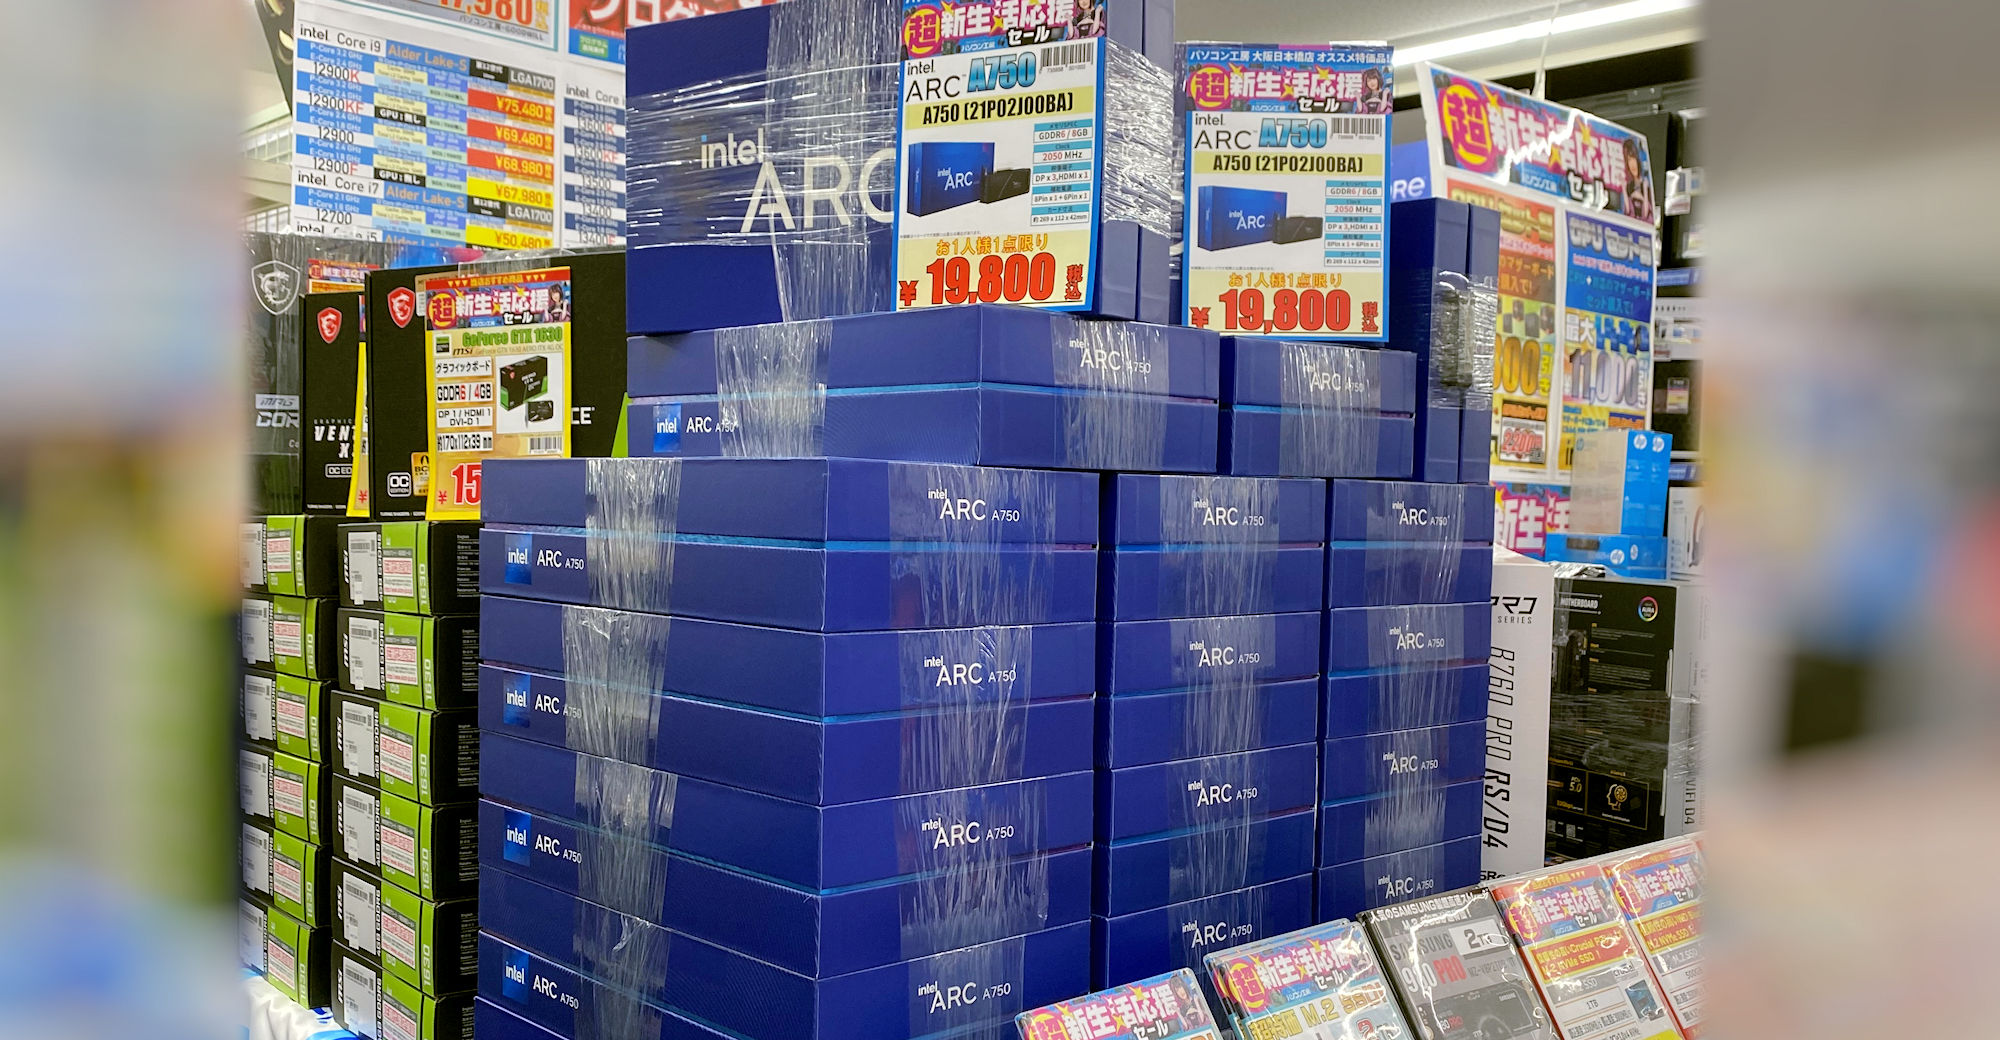 Intel Arc A750 is currently being sold for just $150 in Japan 